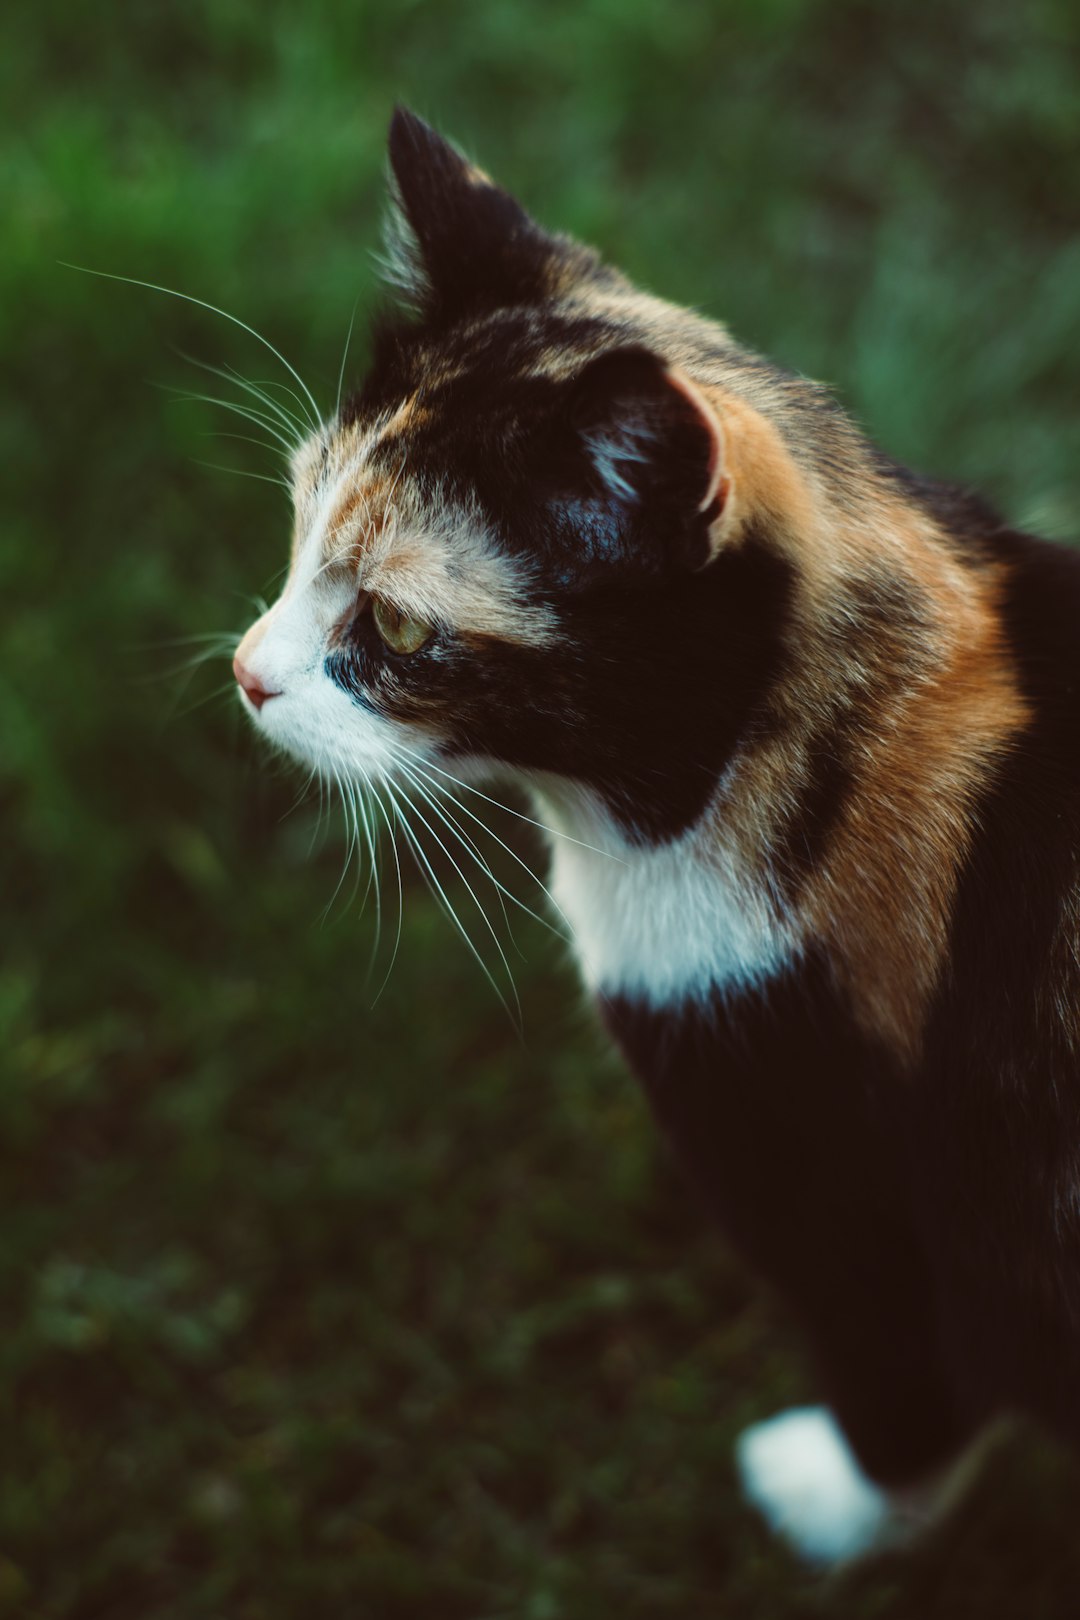 calico cat in close up photography